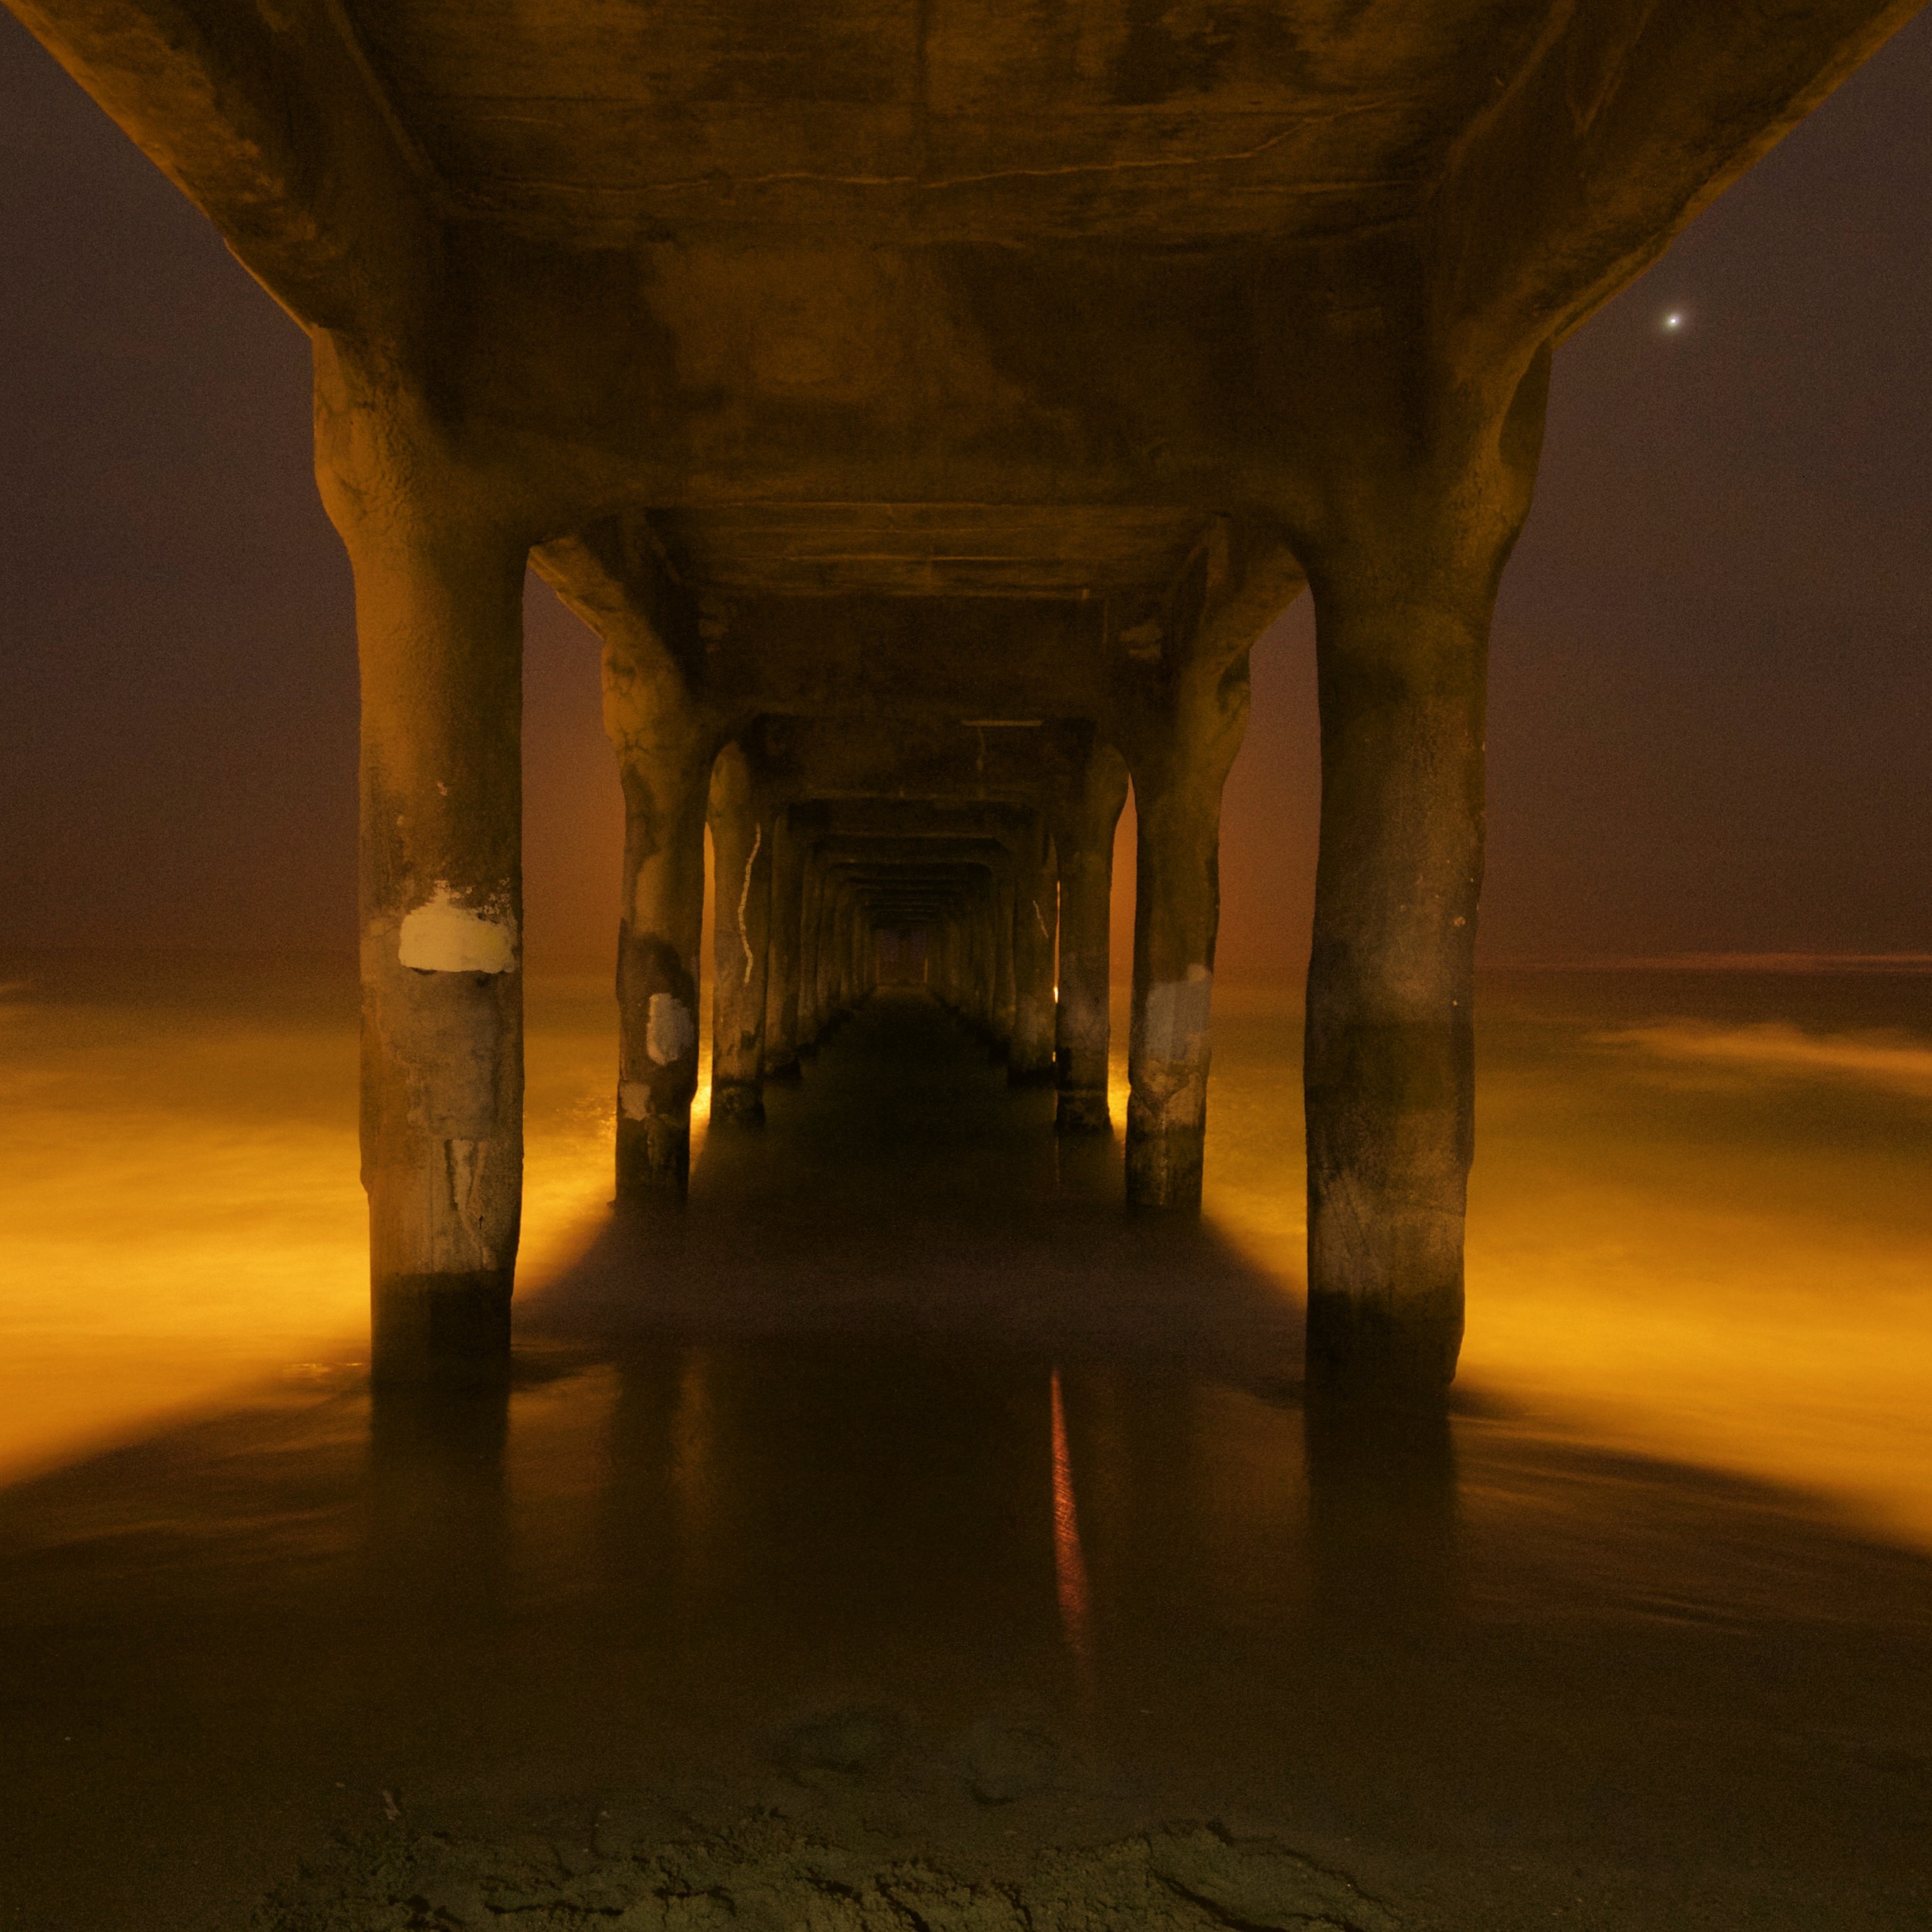 Manhattan Beach Pier at midnight. Light is from the pier and the full moon.